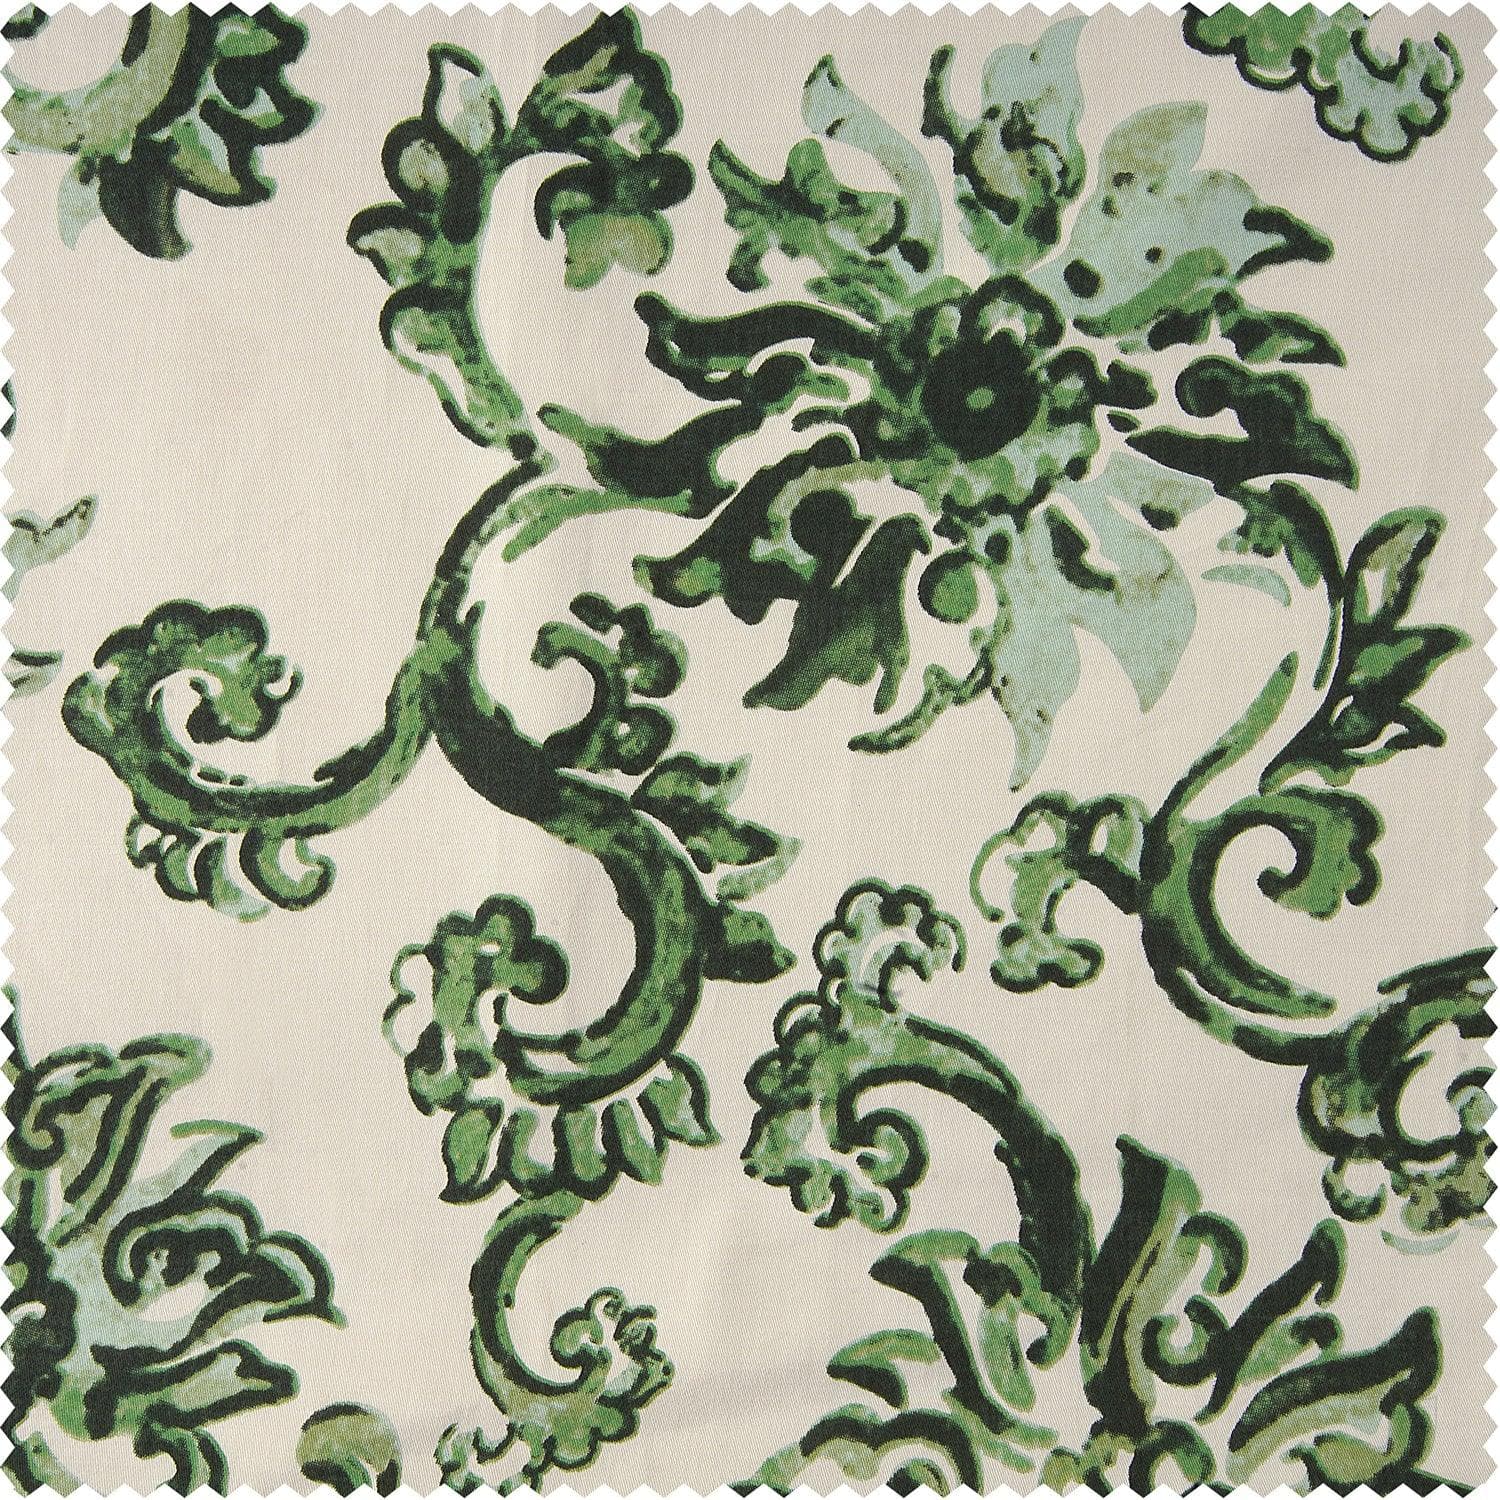 Indonesian Green Floral Printed Cotton Hotel Blackout Curtain